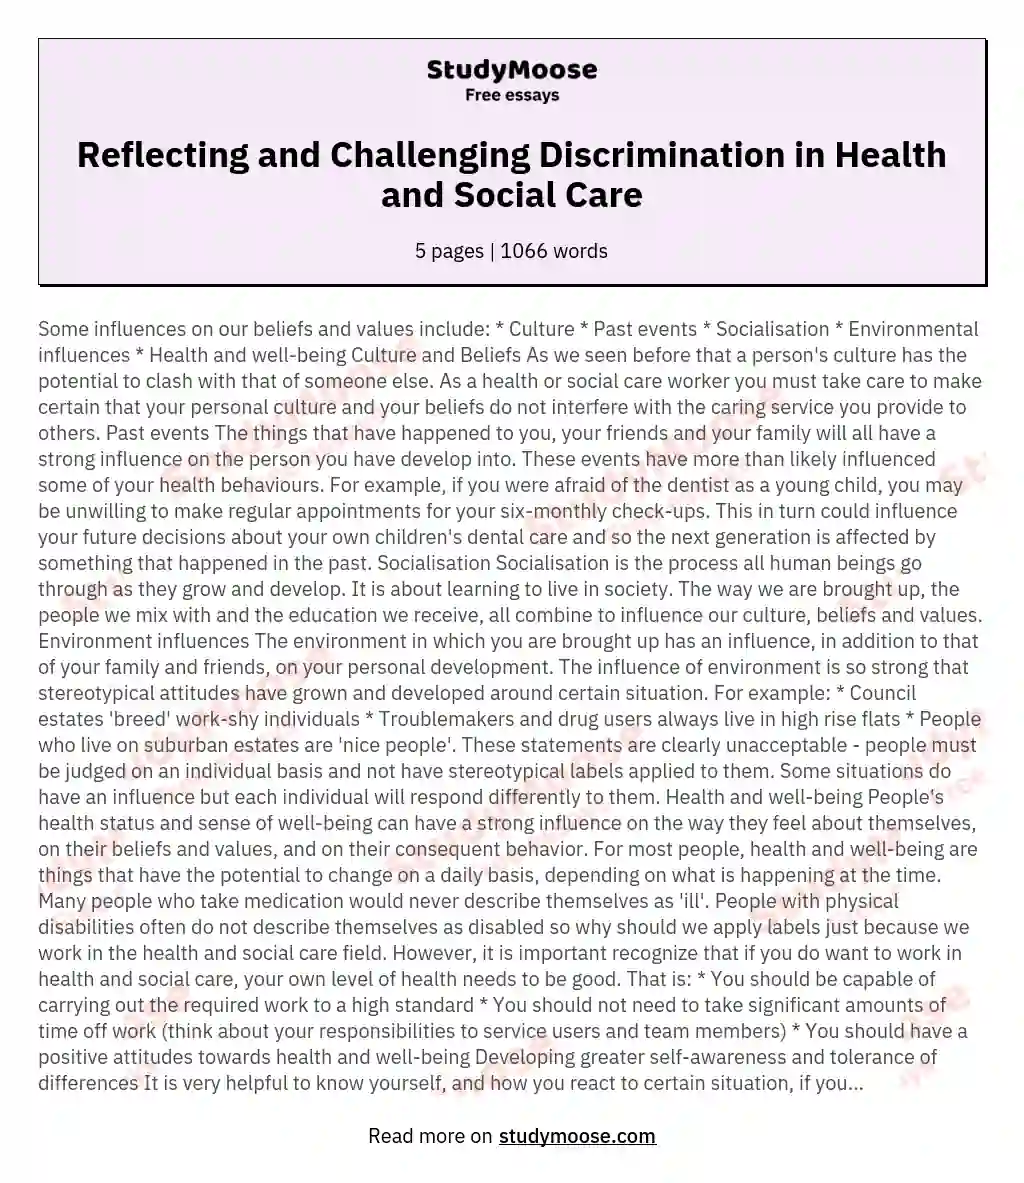 Ways of reflecting on and challenging discriminatory issues in health and social care